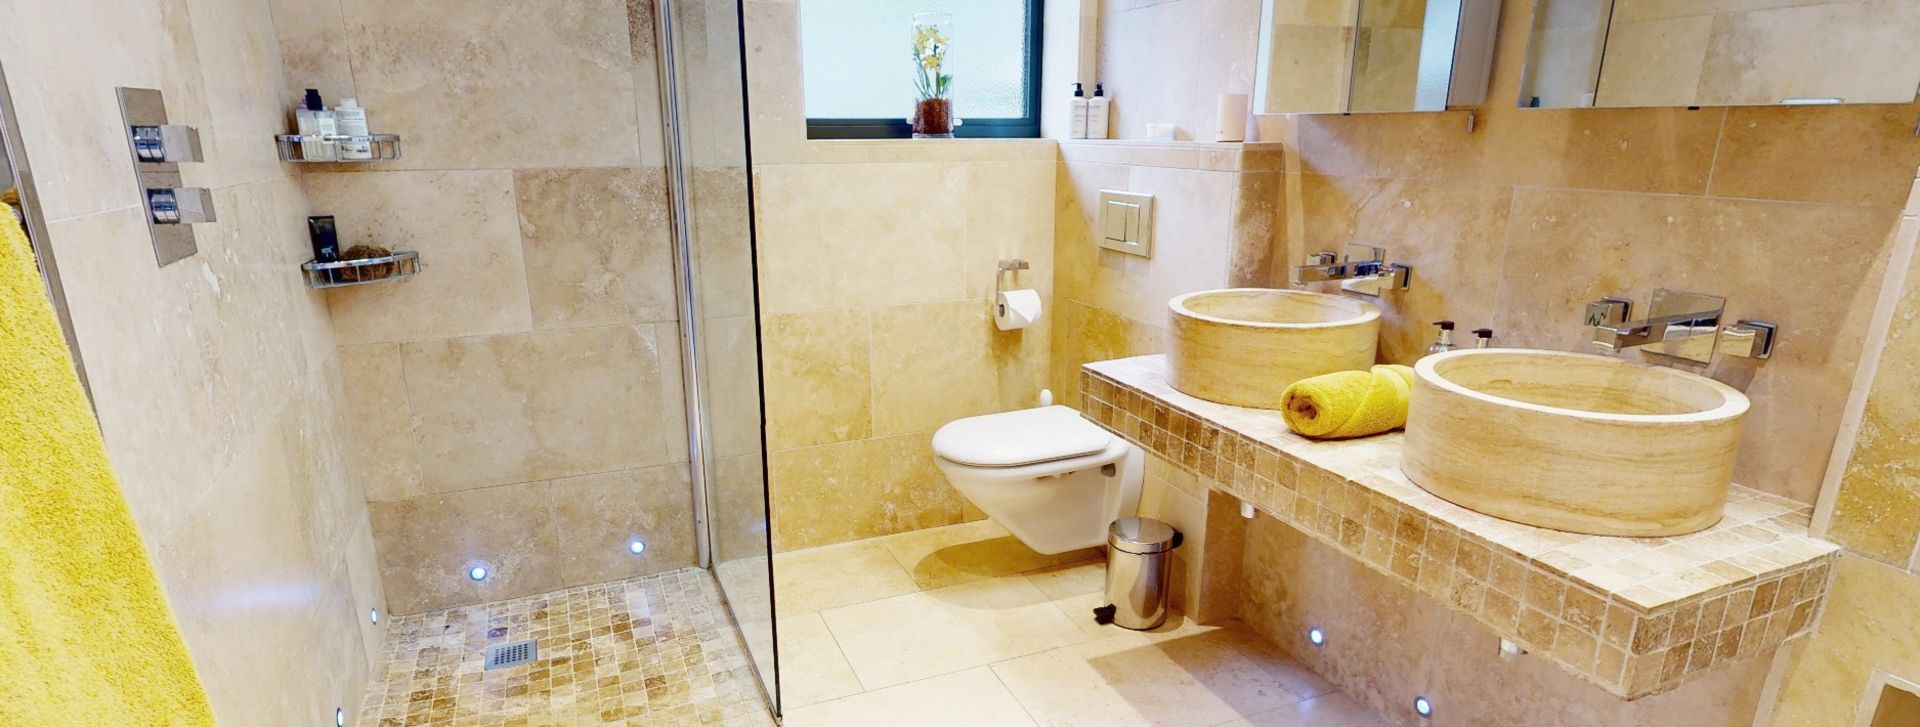 Contents Of A Luxury En-suite Bathroom With Shower - Ref: MAIN/BTH - CL775 - NO VAT ON THE HAMMER